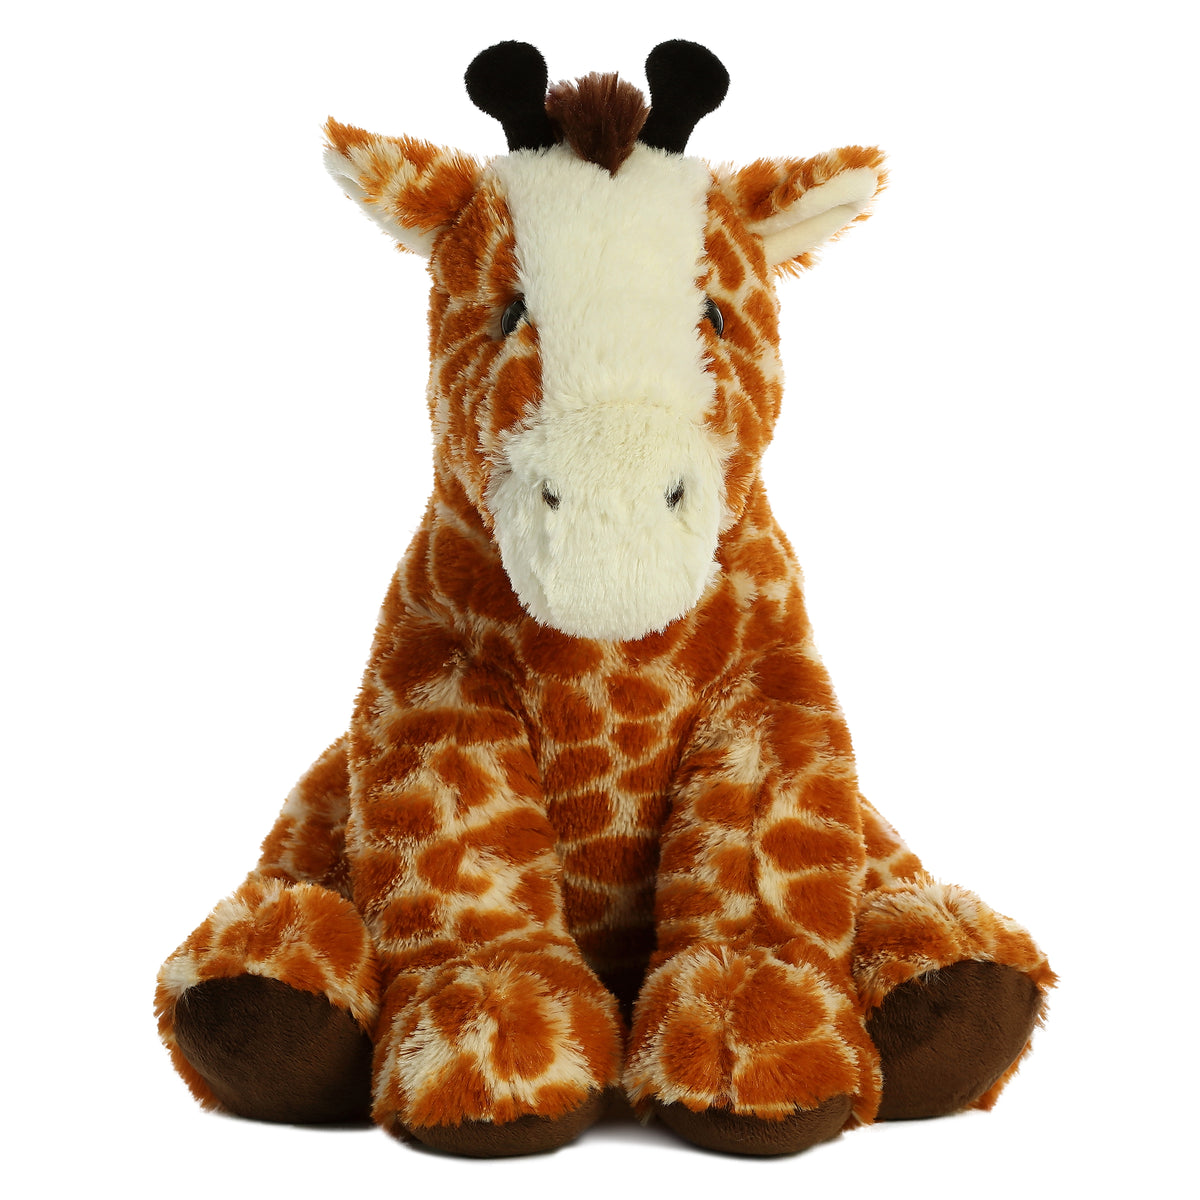 Aurora stuffed animal Giraffe Plush with a patterned coat, gentle eyes, and ossicones, bringing safari charm home.